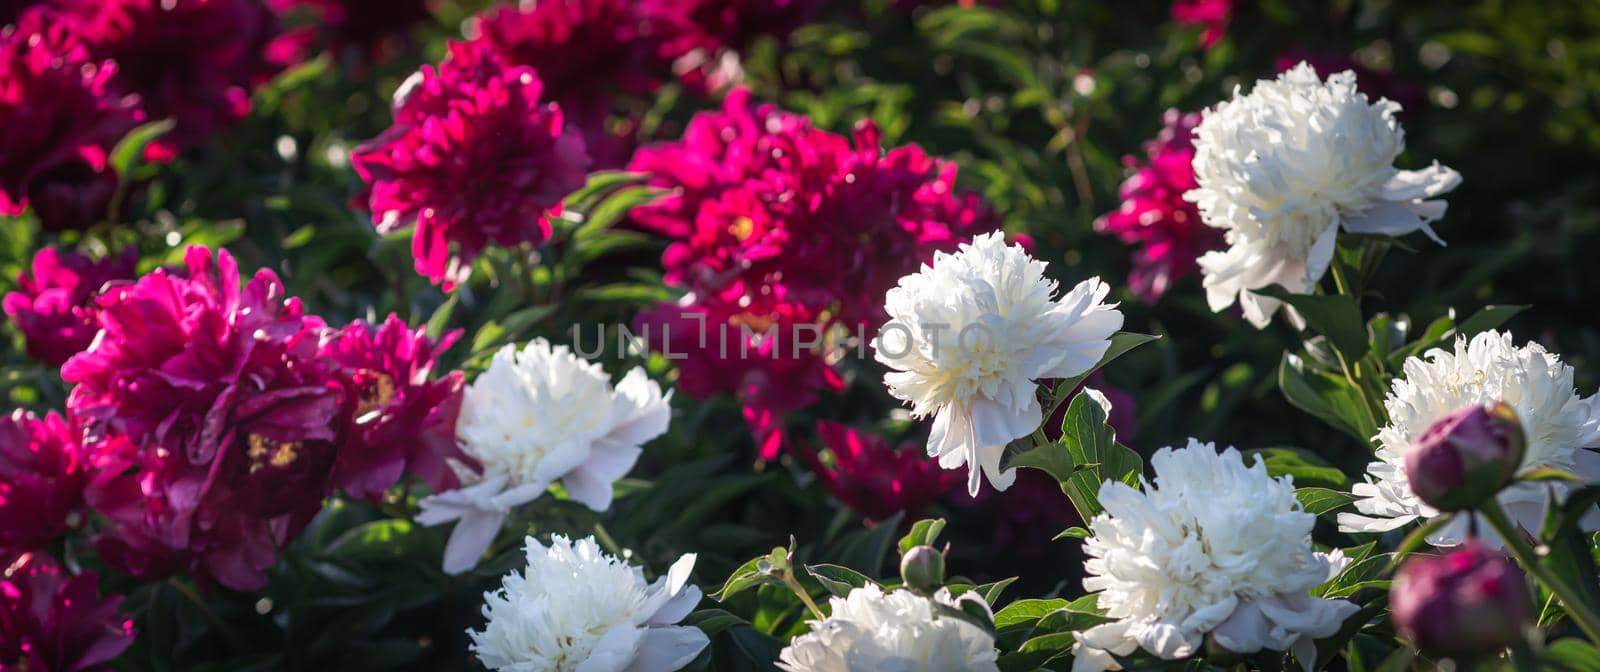 Soft focus image of blooming white and pink peonies in the garden. Selective focus. Shallow depth of field